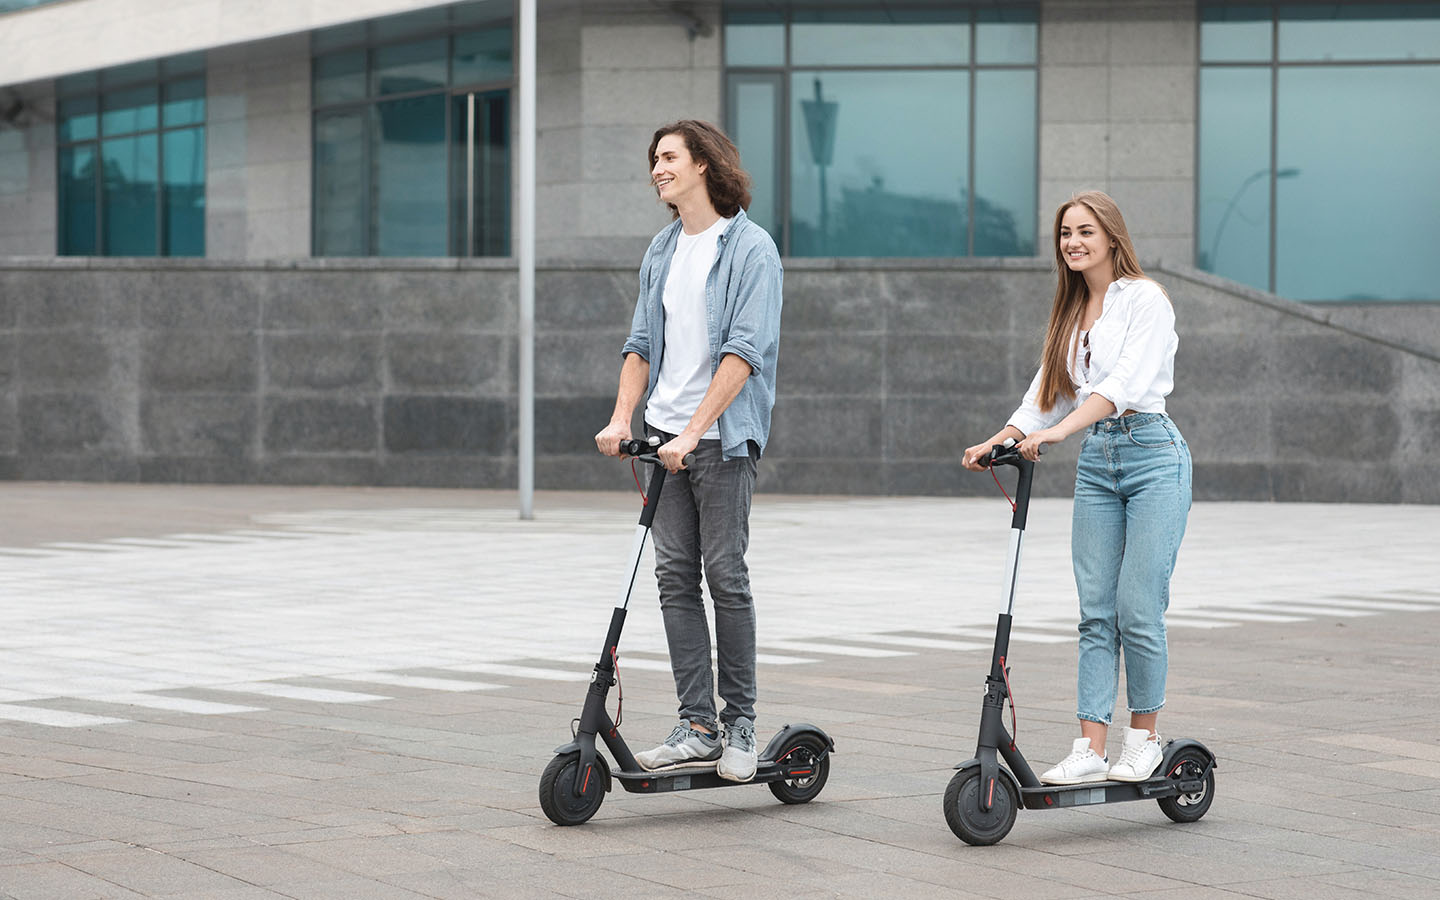 follow the rules and regulations and enjoy the electric scooter riding experience